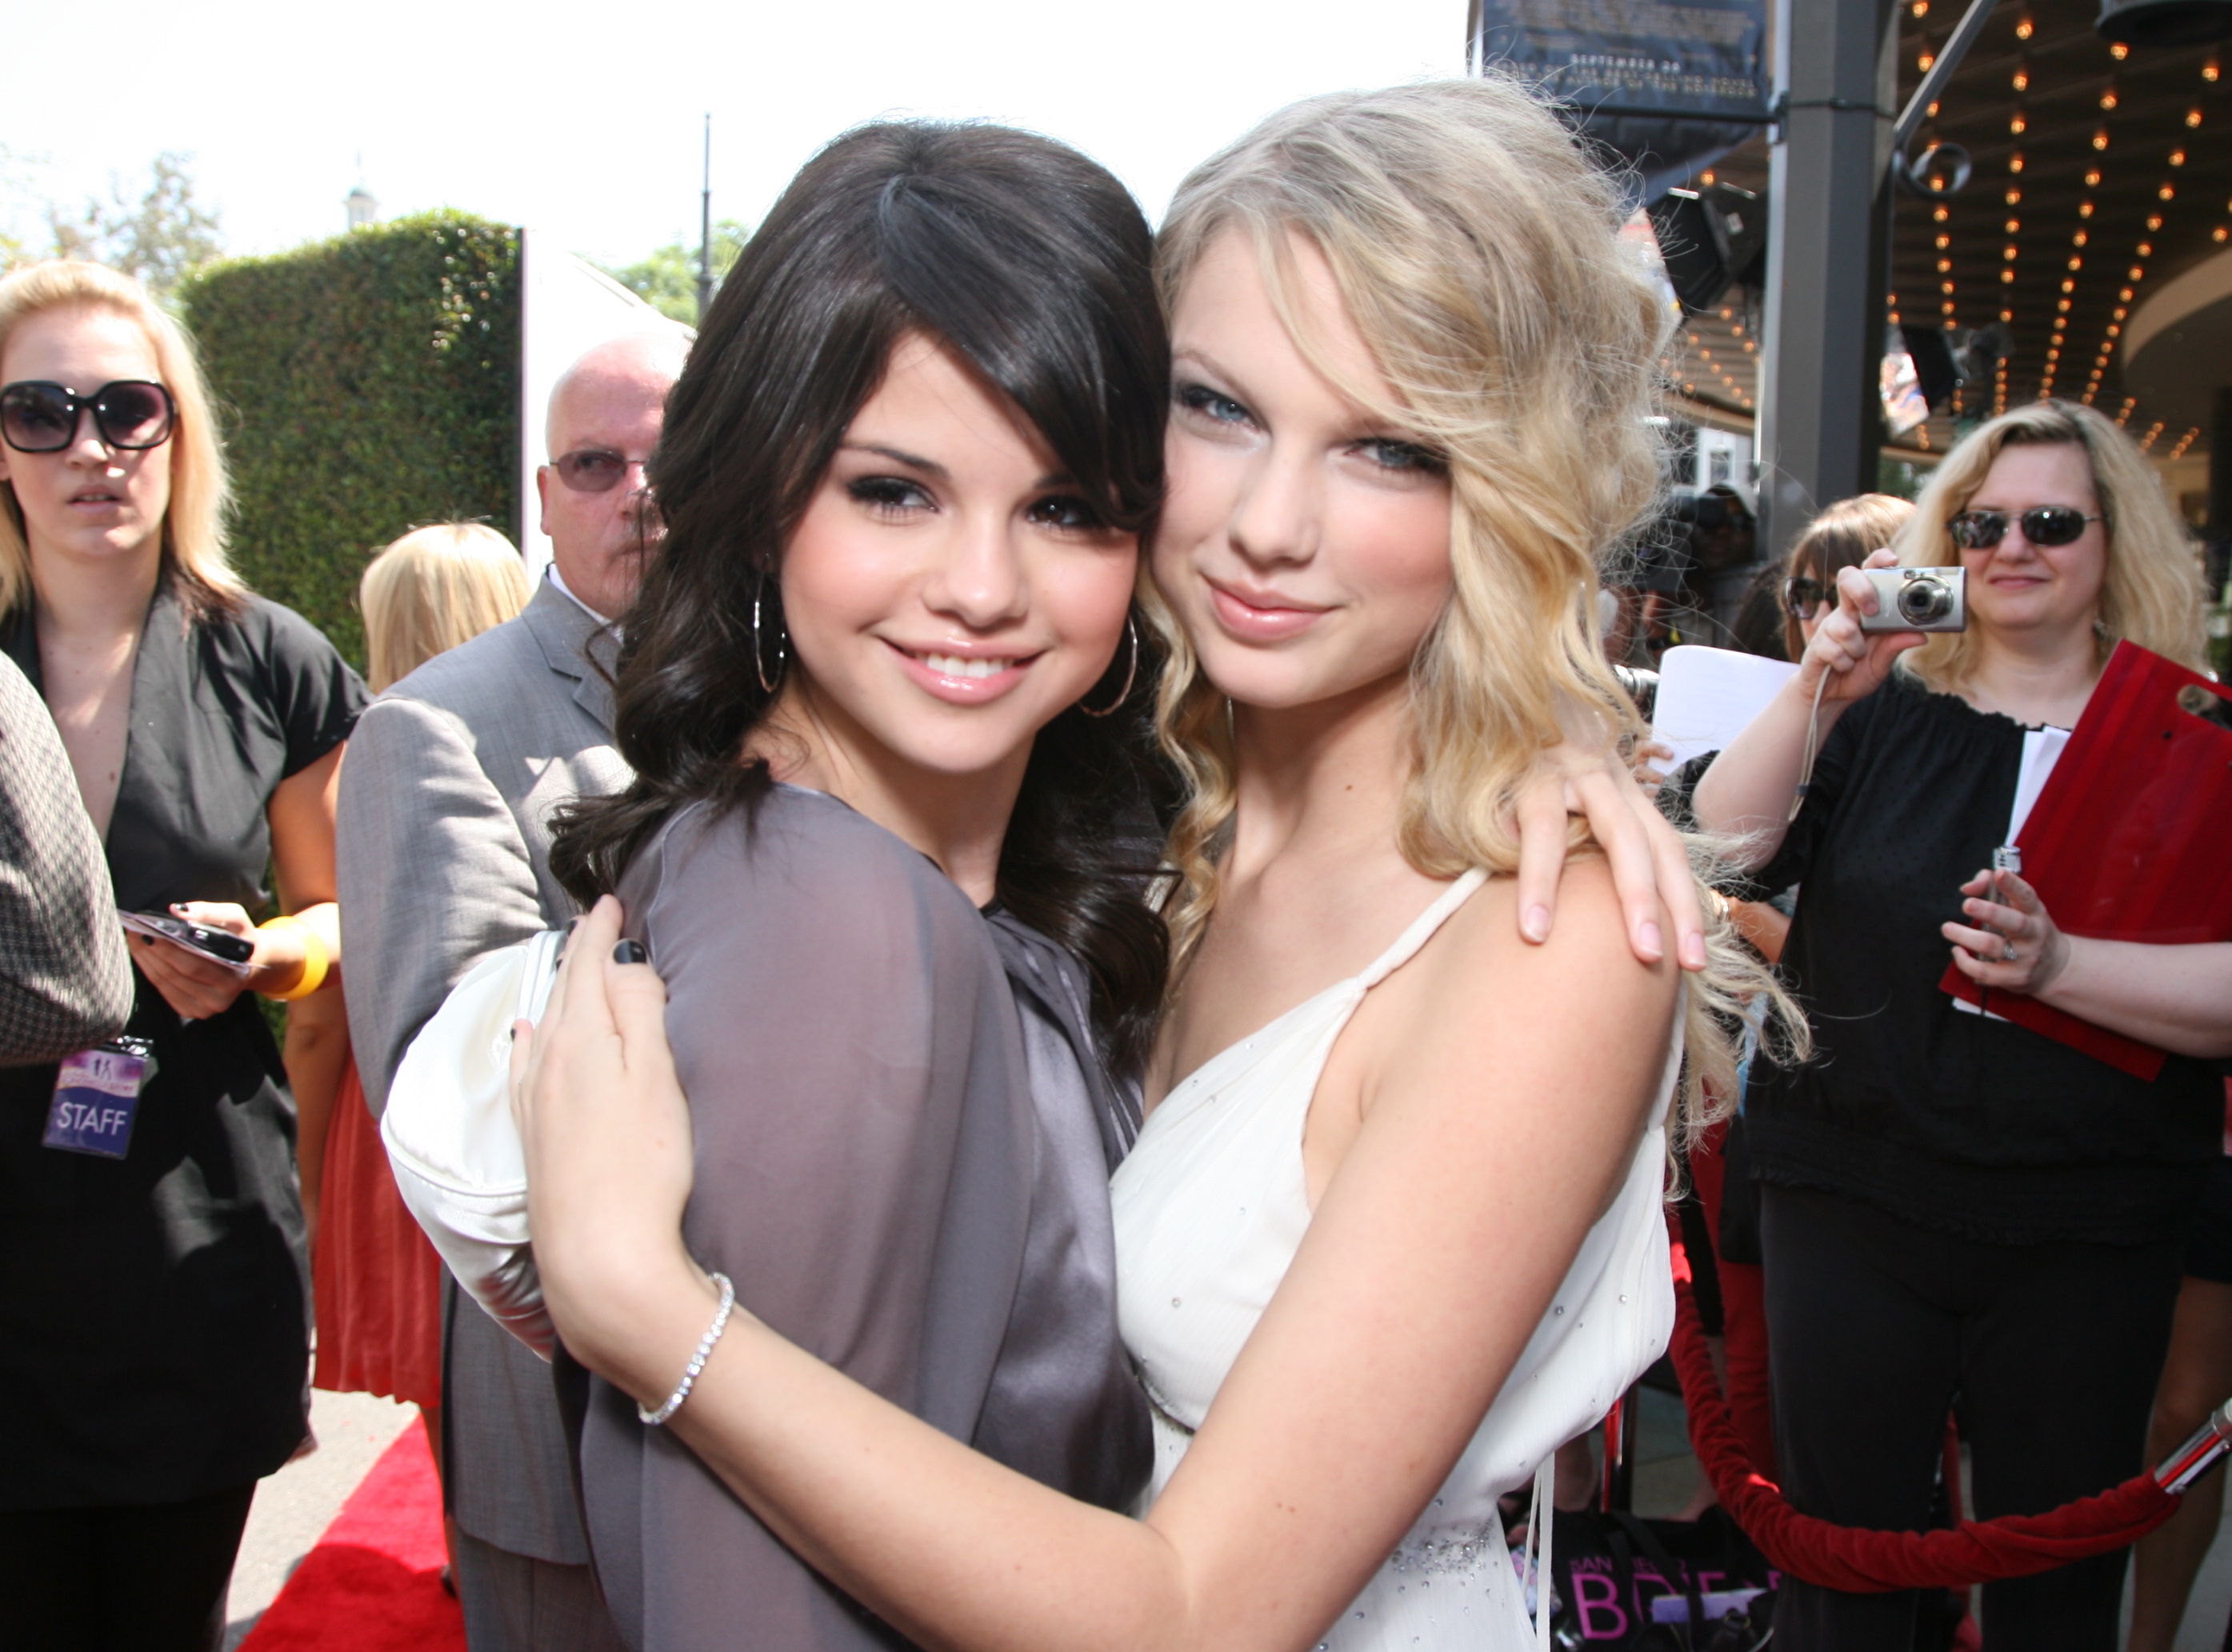 Selena Gomez and Taylor Swift See Their Friendship Timeline